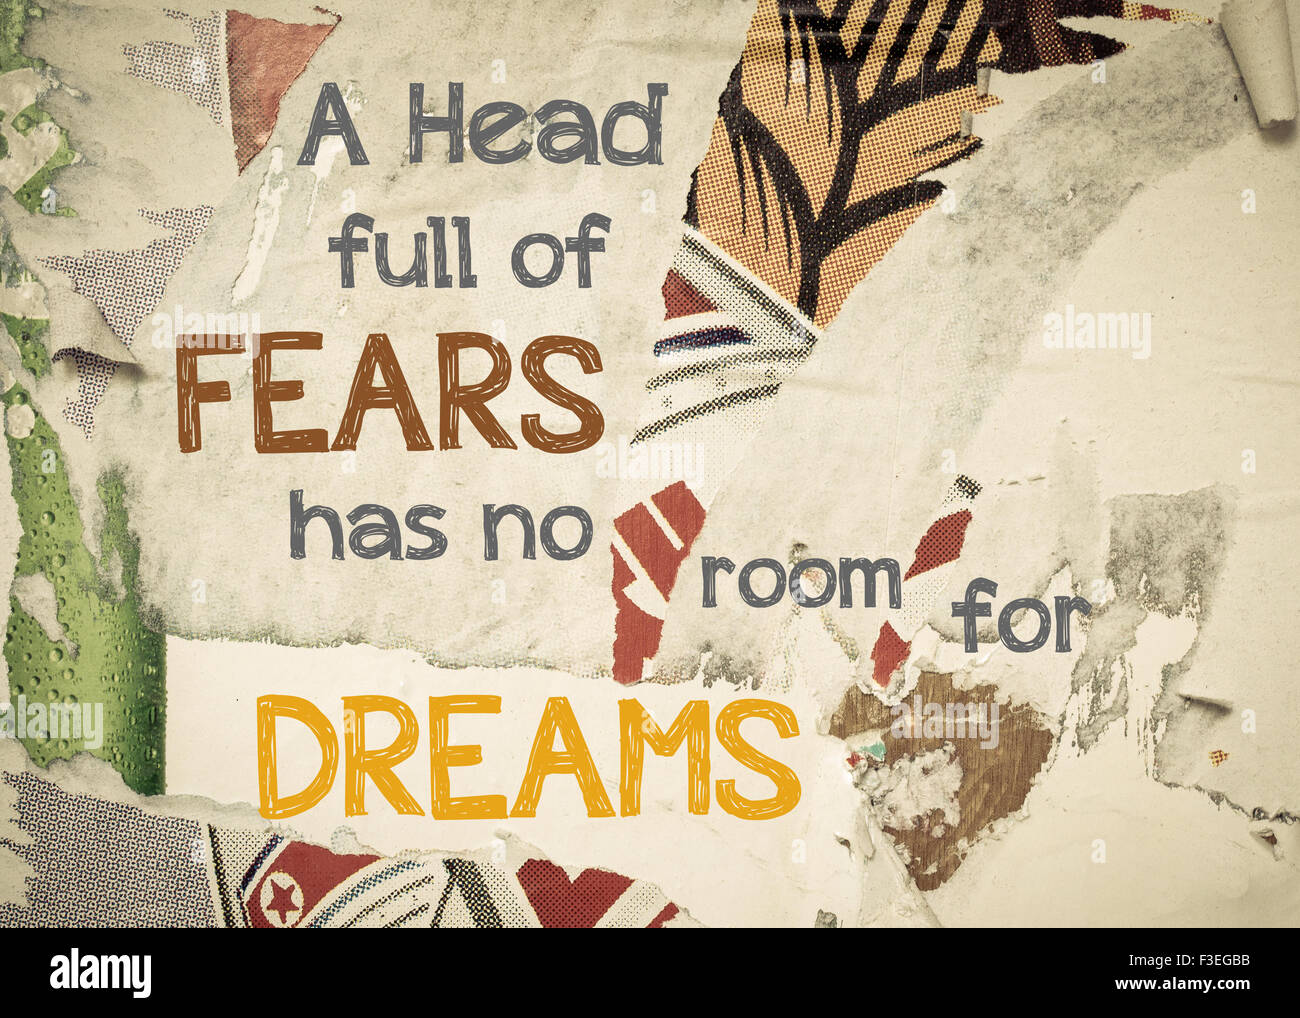 A Head Full Of Fears Has No Room For Dreams- Inspirational message written on vintage grunge background with Old Torn Posters. Motivational concept image Stock Photo